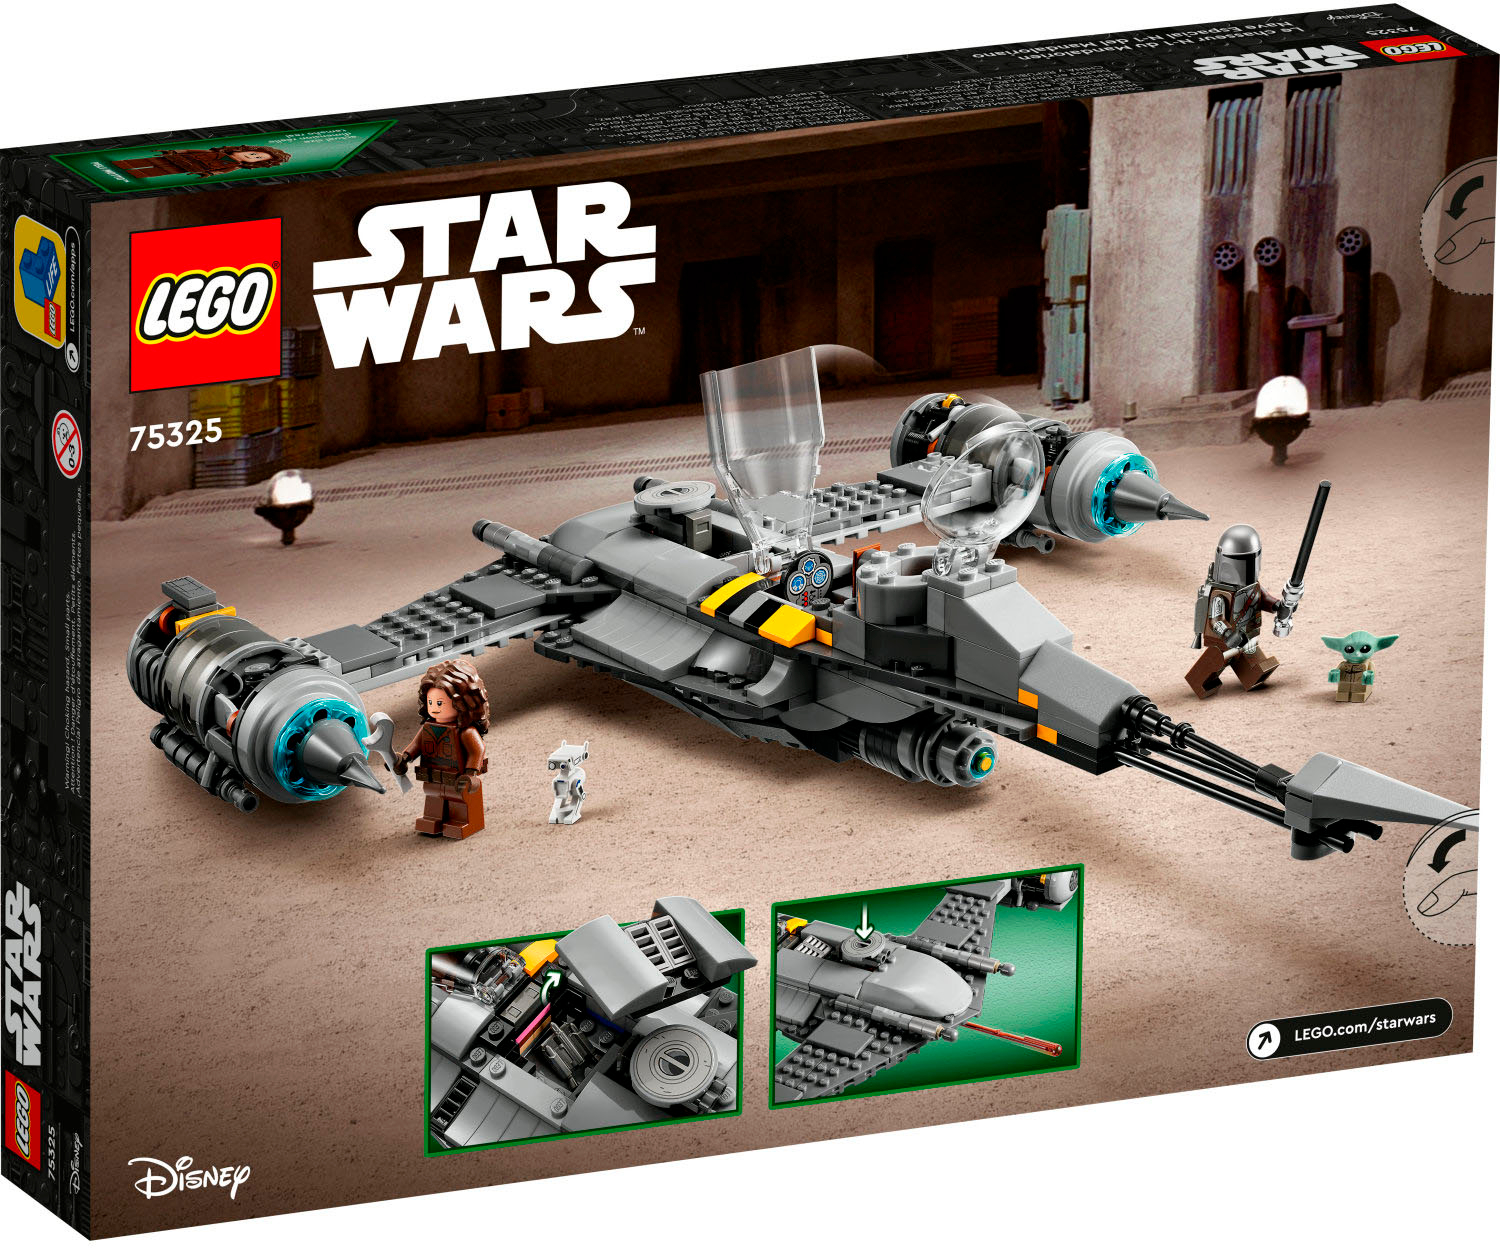 Angle View: LEGO - Star Wars The Mandalorians N-1 Starfighter 75325 Toy Building Kit (412 Pieces)